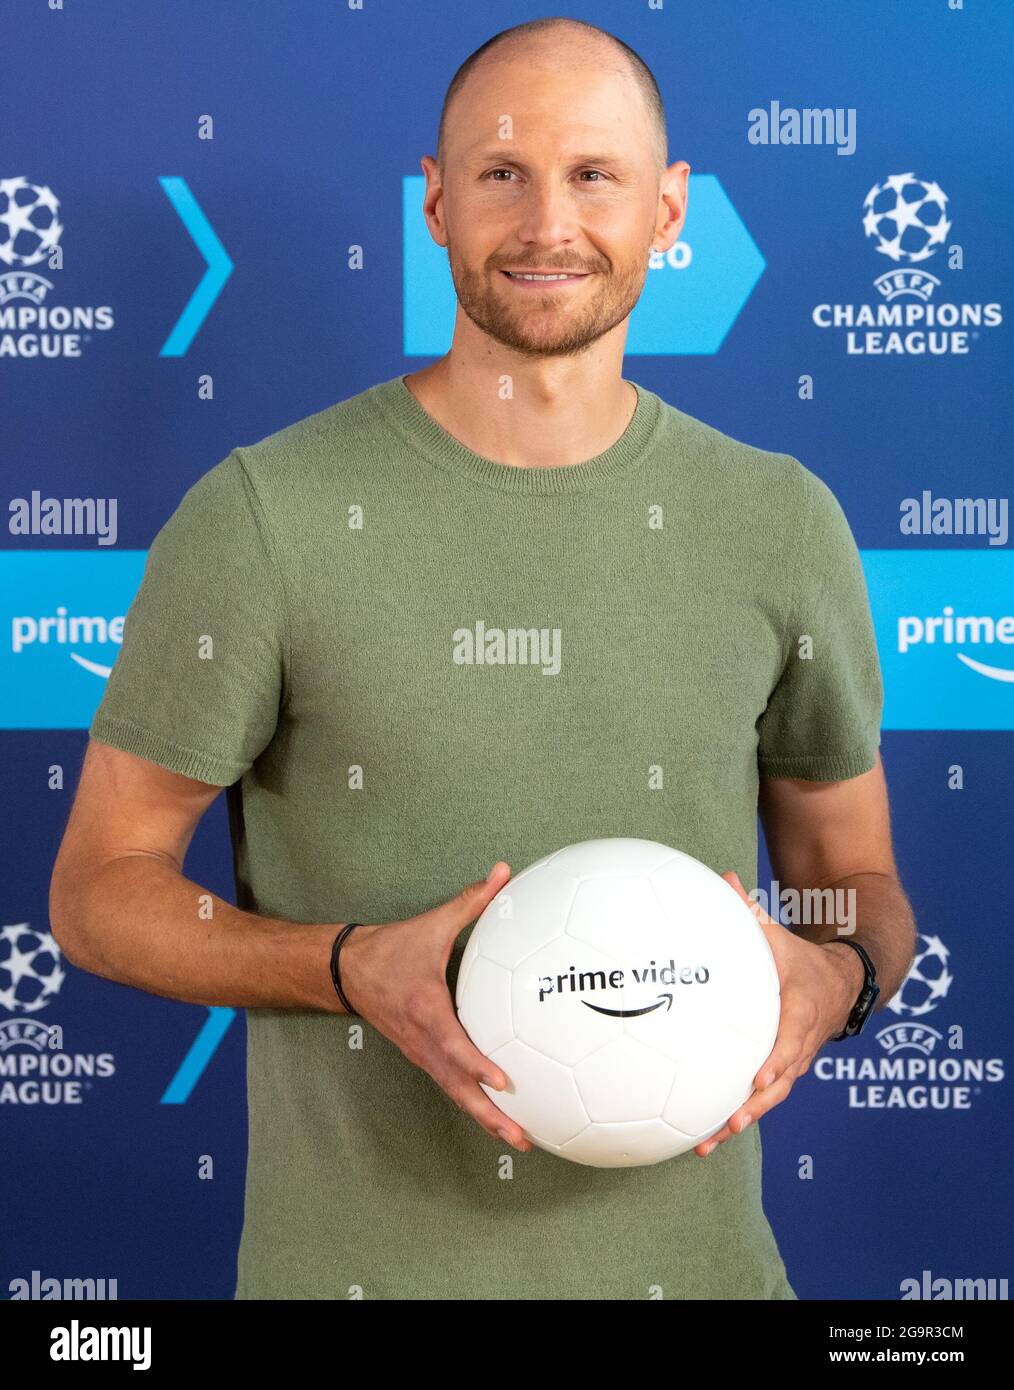 Munich, Germany. 27th July, 2021. Benedikt Höwedes, commentator, takes part in a press conference of Amazon Prime Video